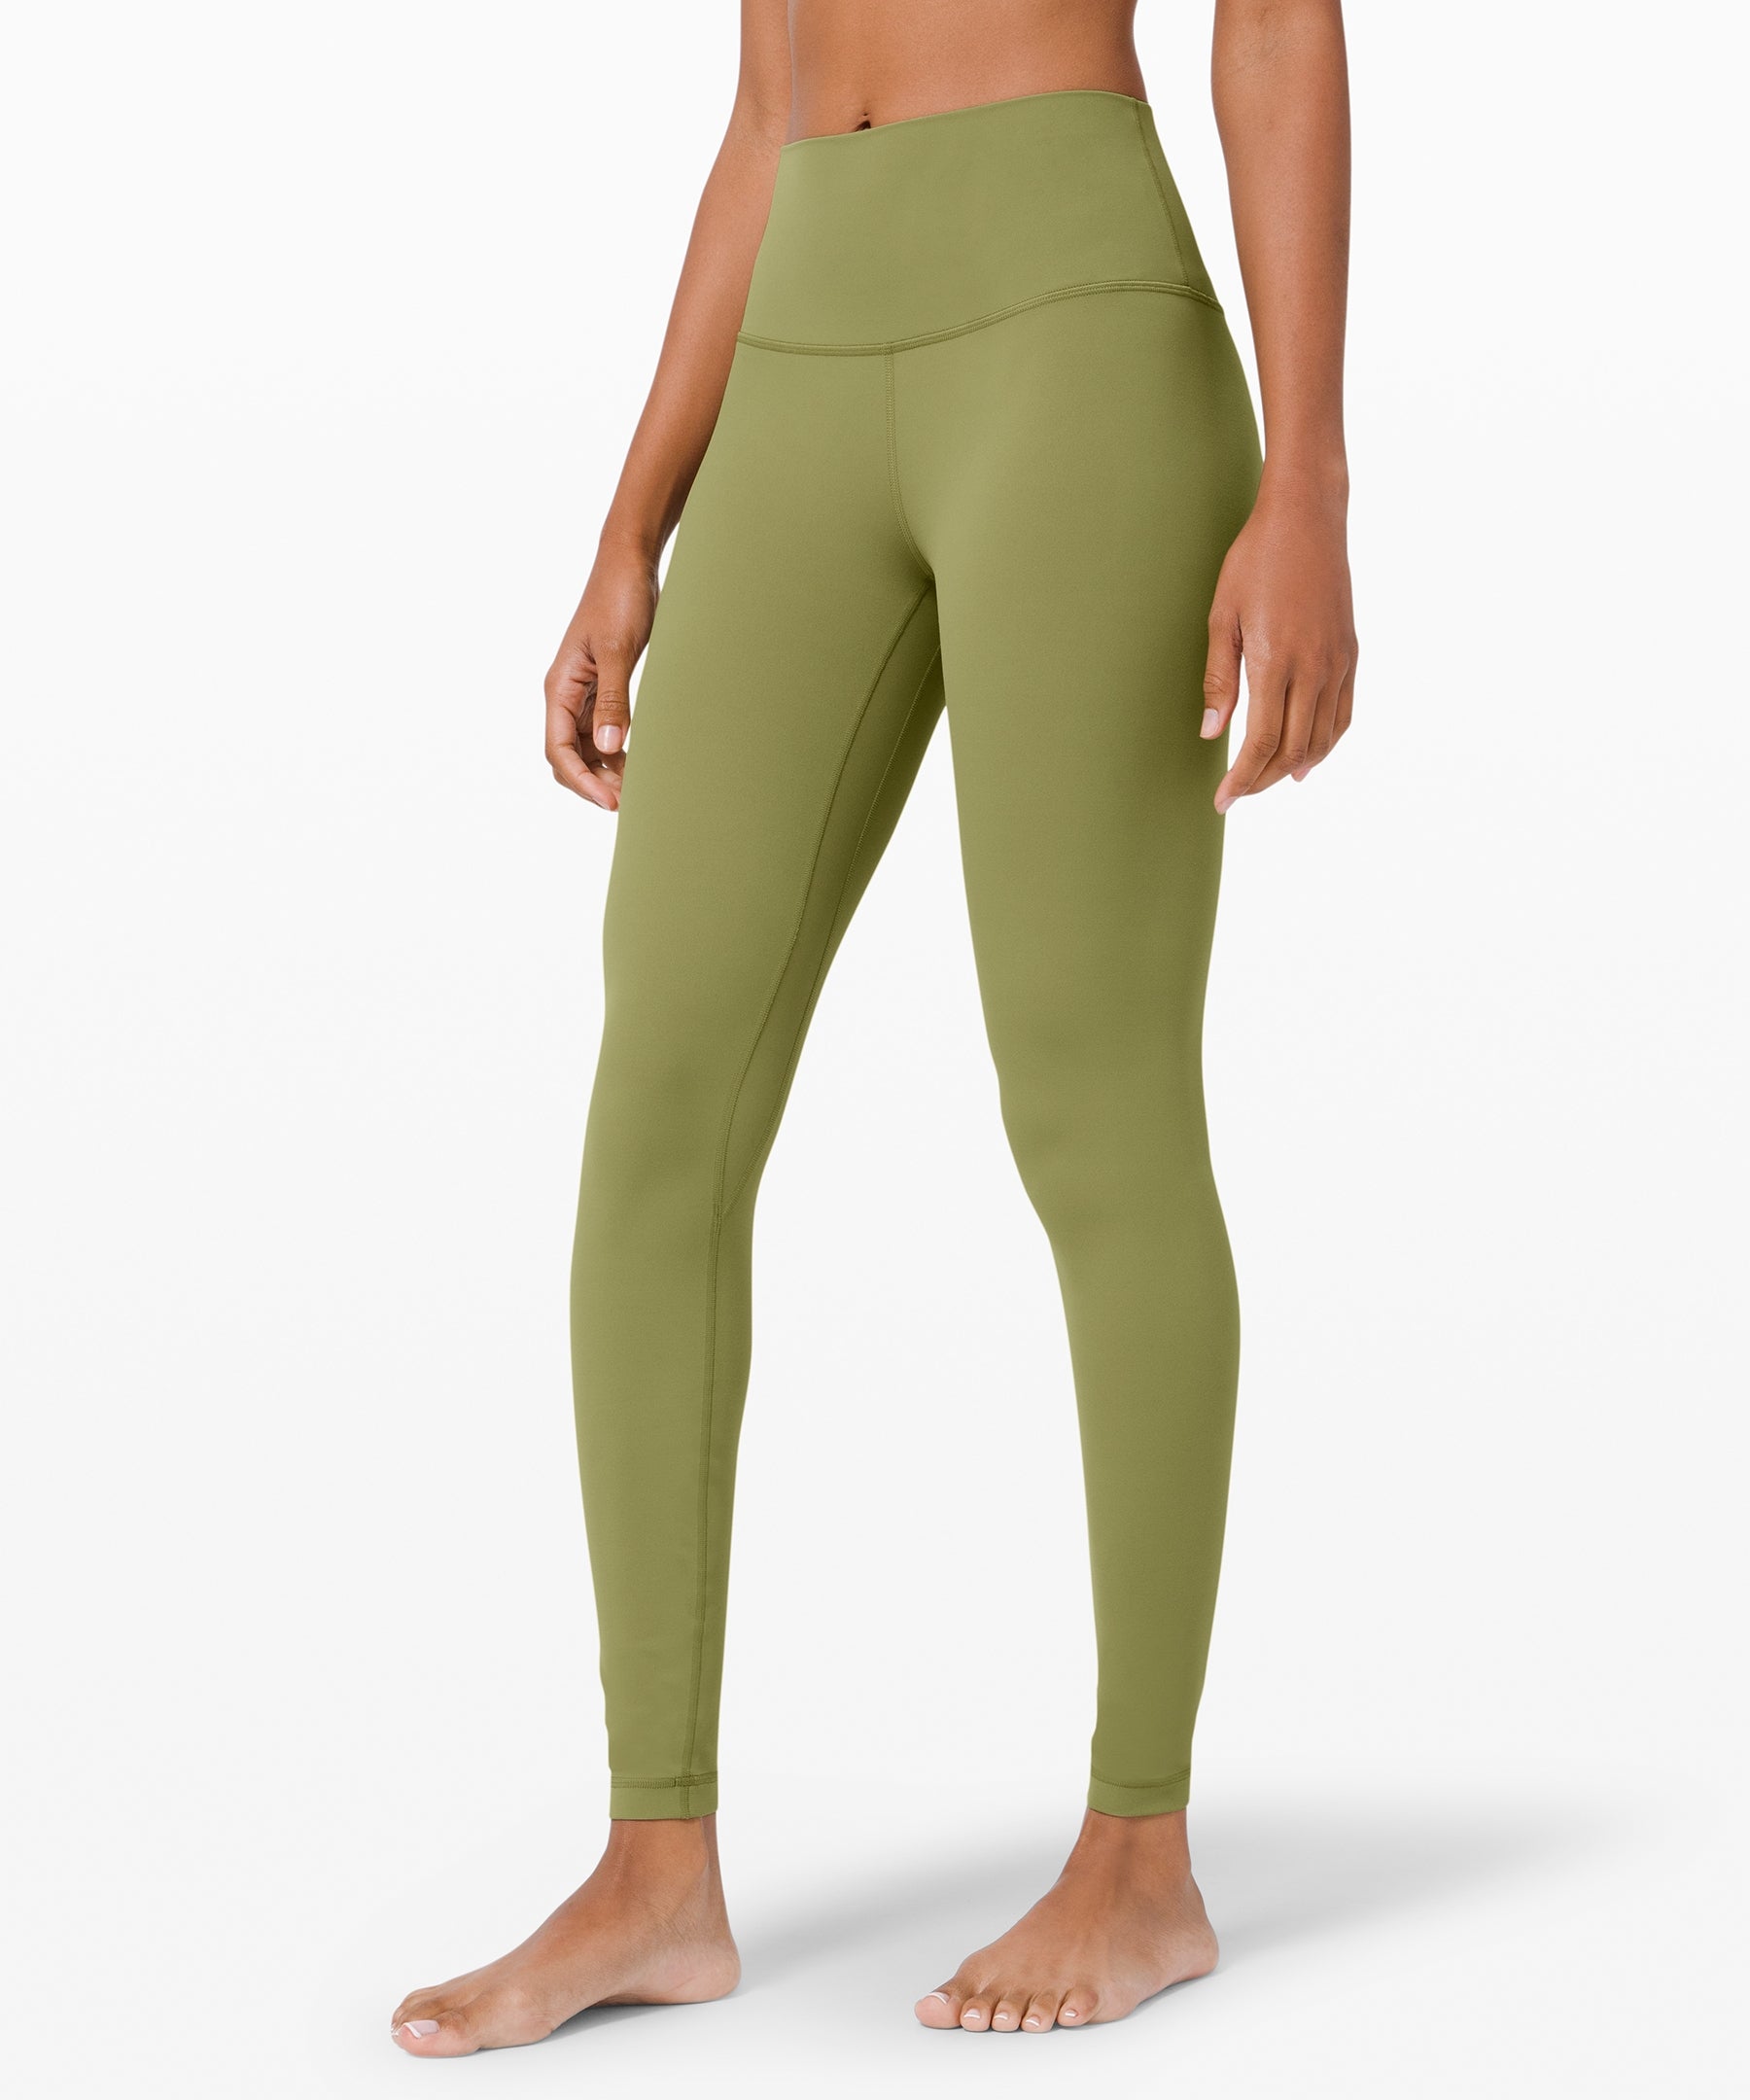 lululemon Align High-Rise Pant 28 Review—Worth the Price